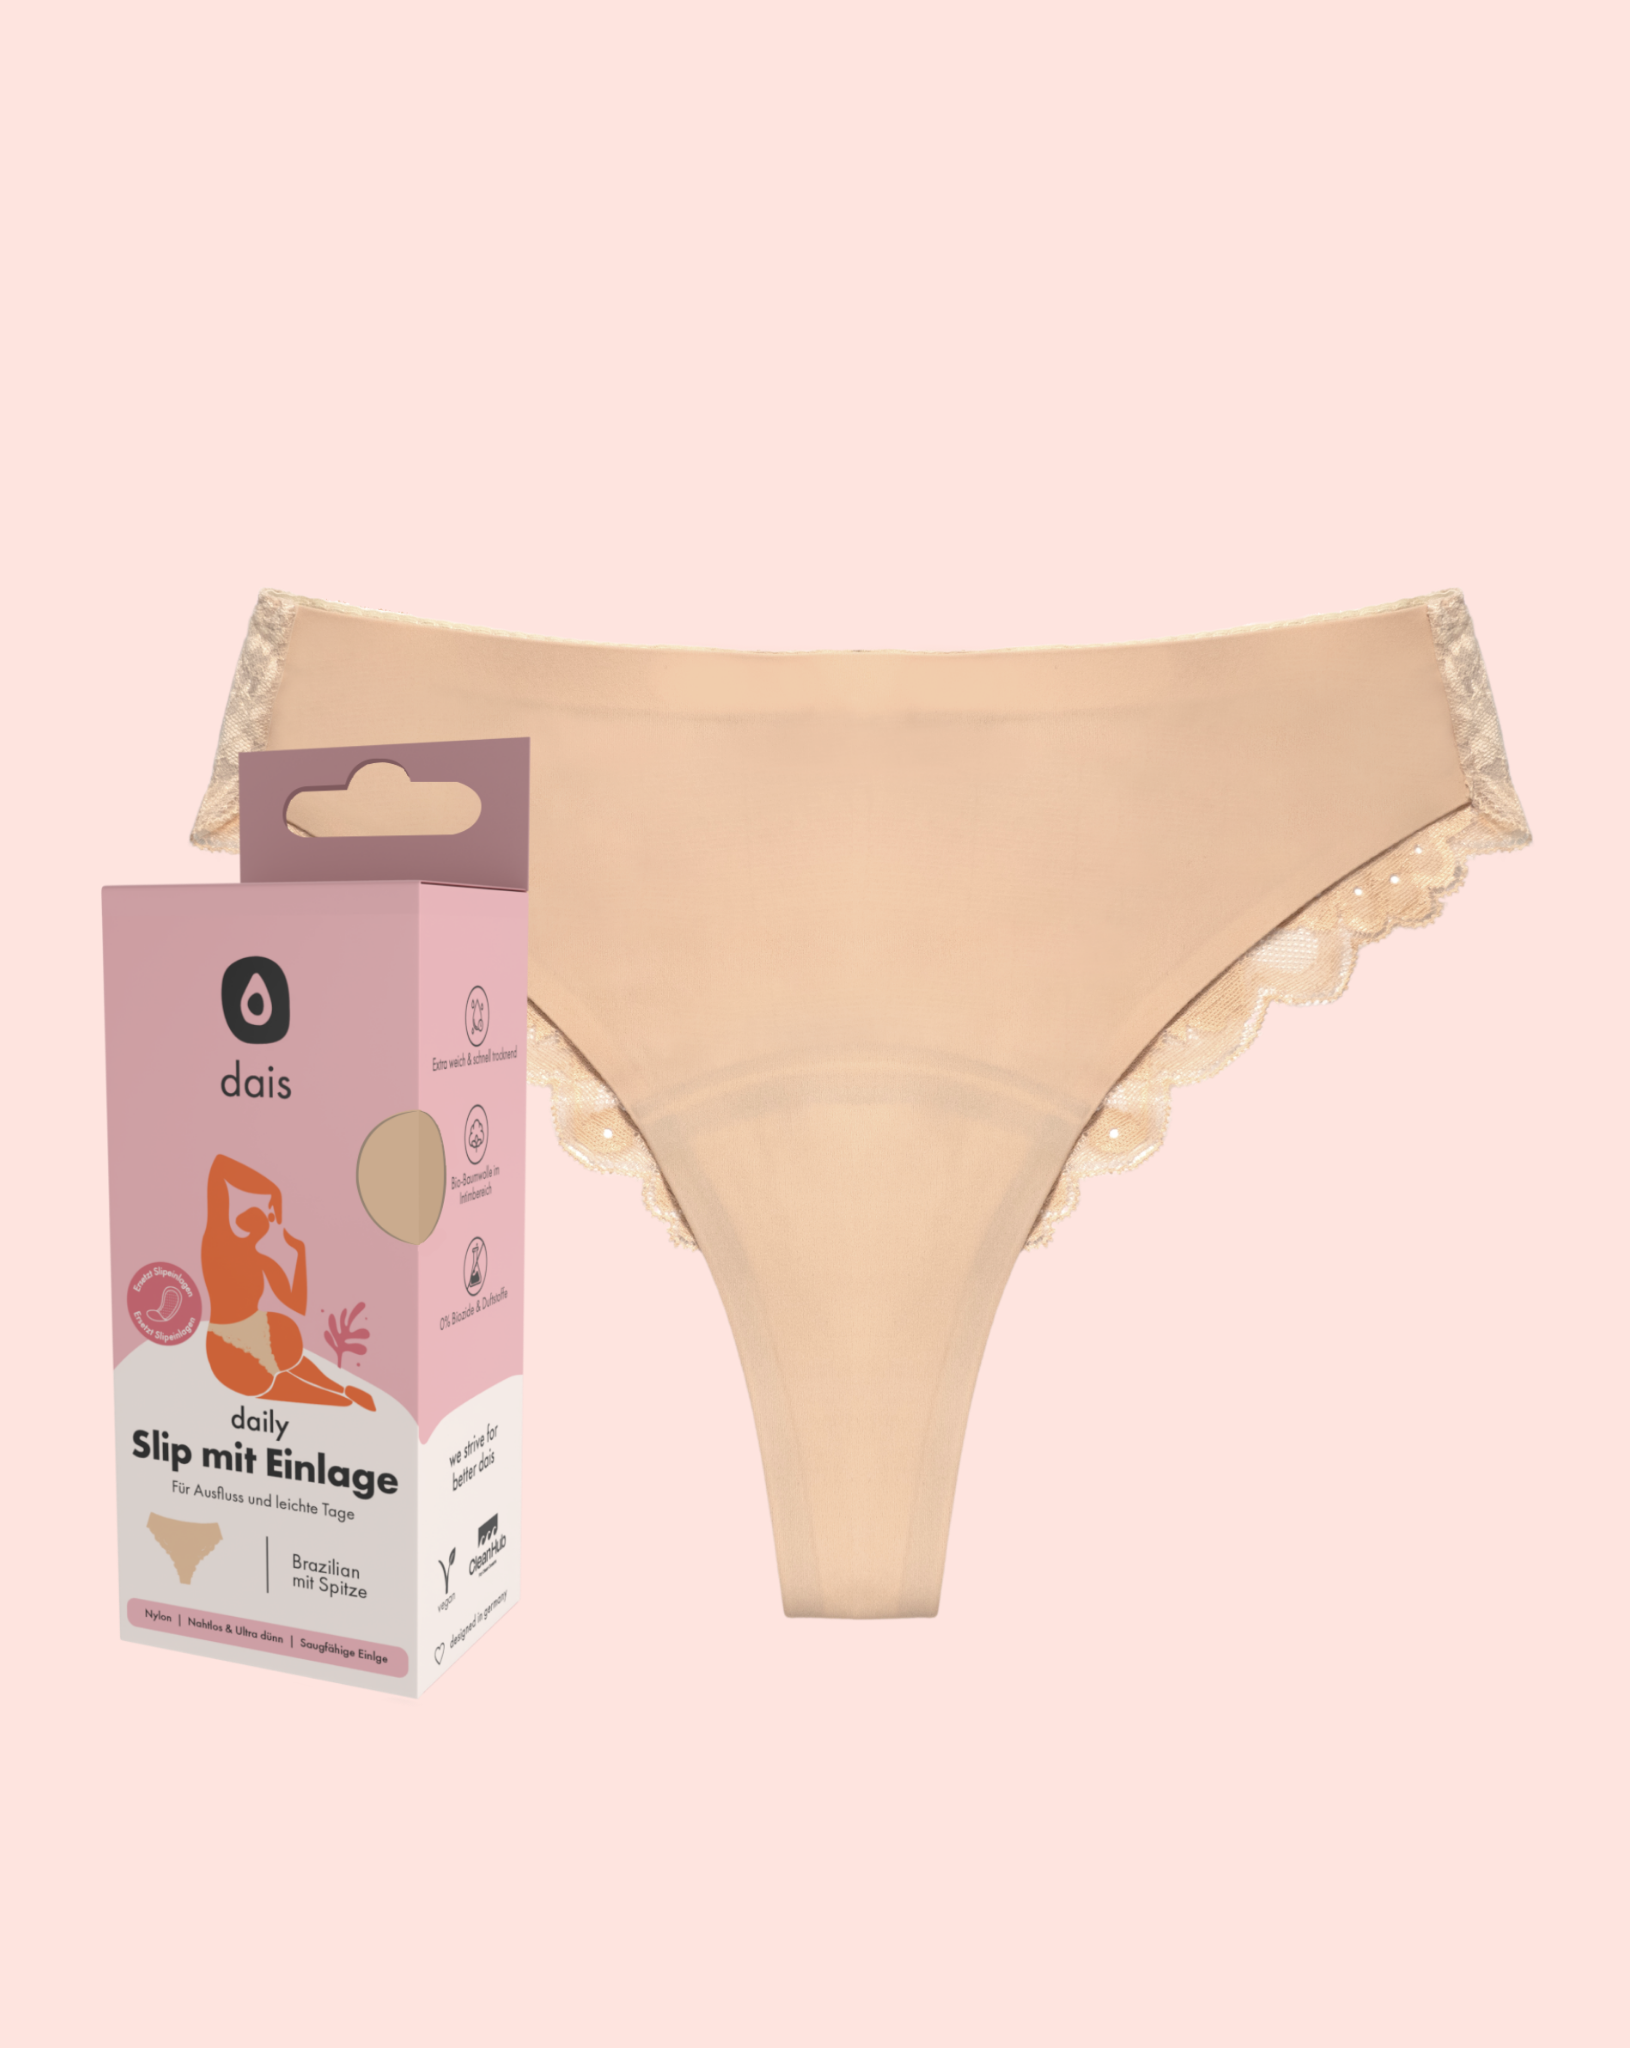 dais daily underwear which is a sustainable alternative to panty liners and tampons. Used for light periods and discharge. In Brazilian cut with lace and beige colour. Available in a set of 3 and 10% discount.